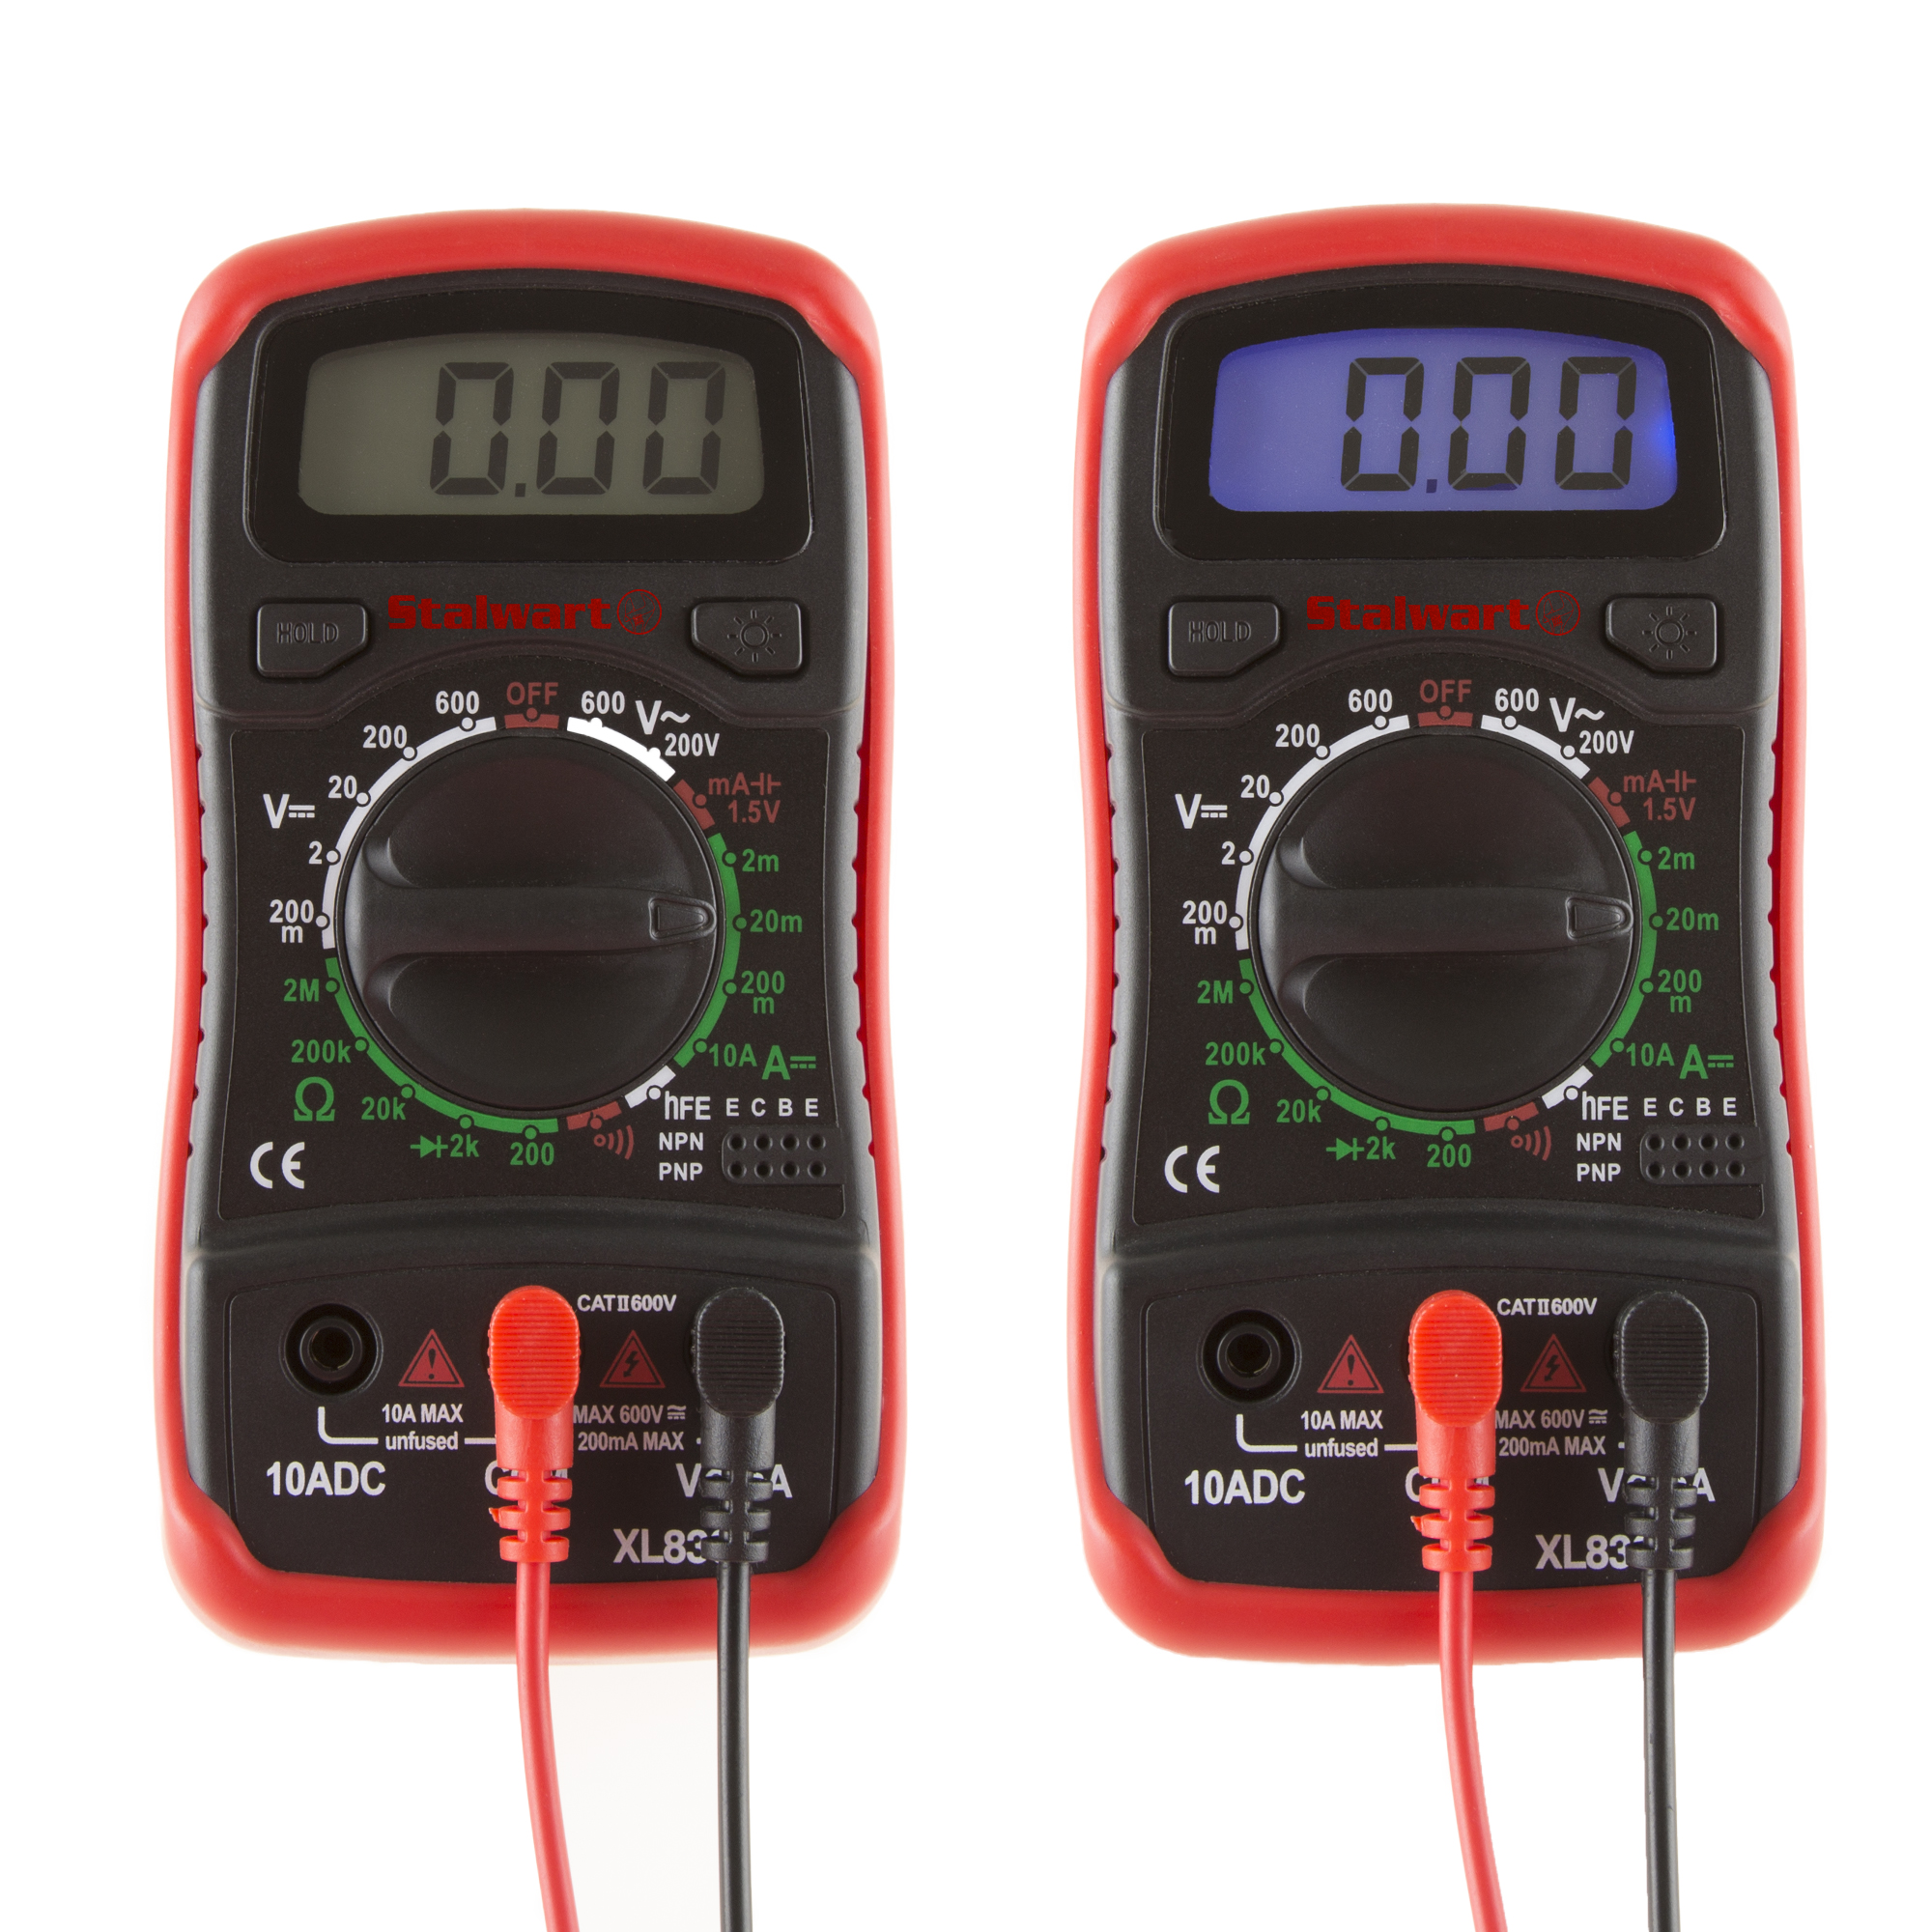 Stalwart Digital Multimeter with Backlit LCD Display and Needle Probes- Amp, Ohm and Voltage Tester for Outlets, Wire Continuity and Batteries - image 4 of 5